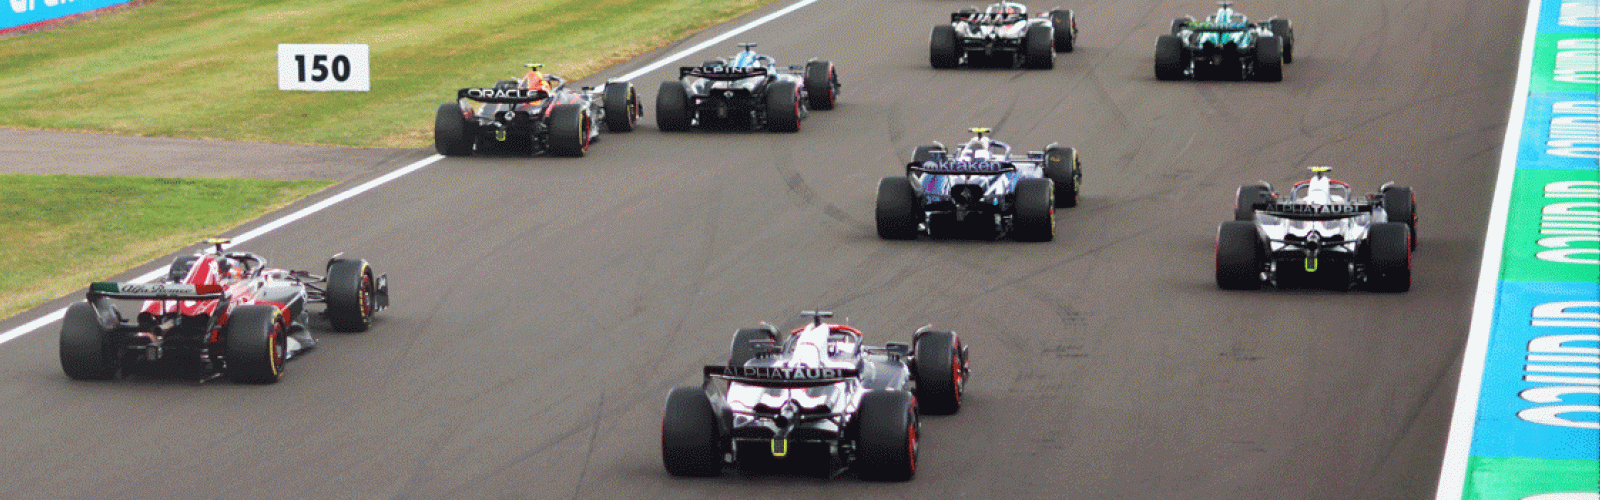 British Grand Prix Silverstone ticket, hotel and hospitality packages image